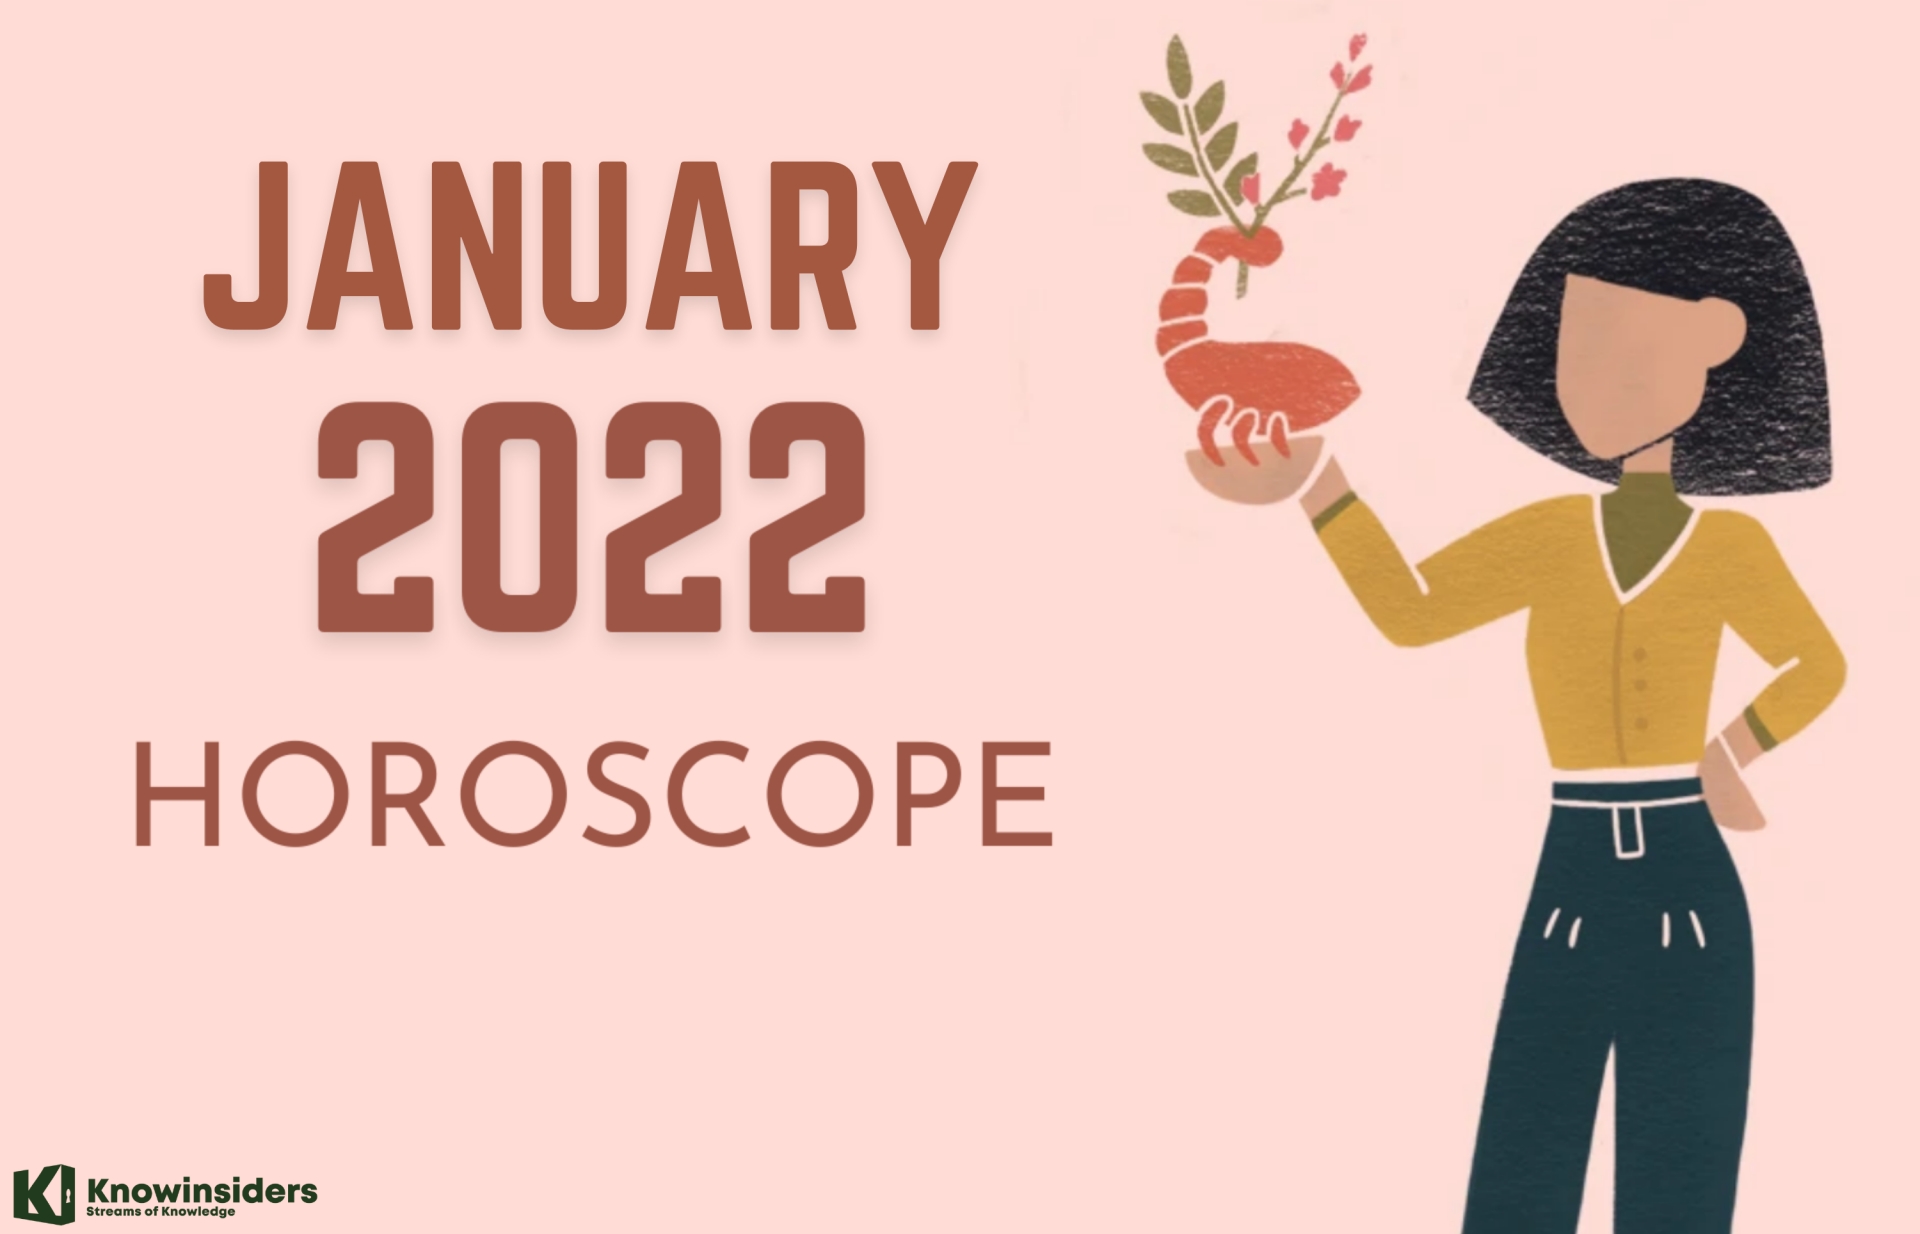 JANUARY 2022 Monthly Horoscope: Astrological Prediction for All 12 Zodiac Signs